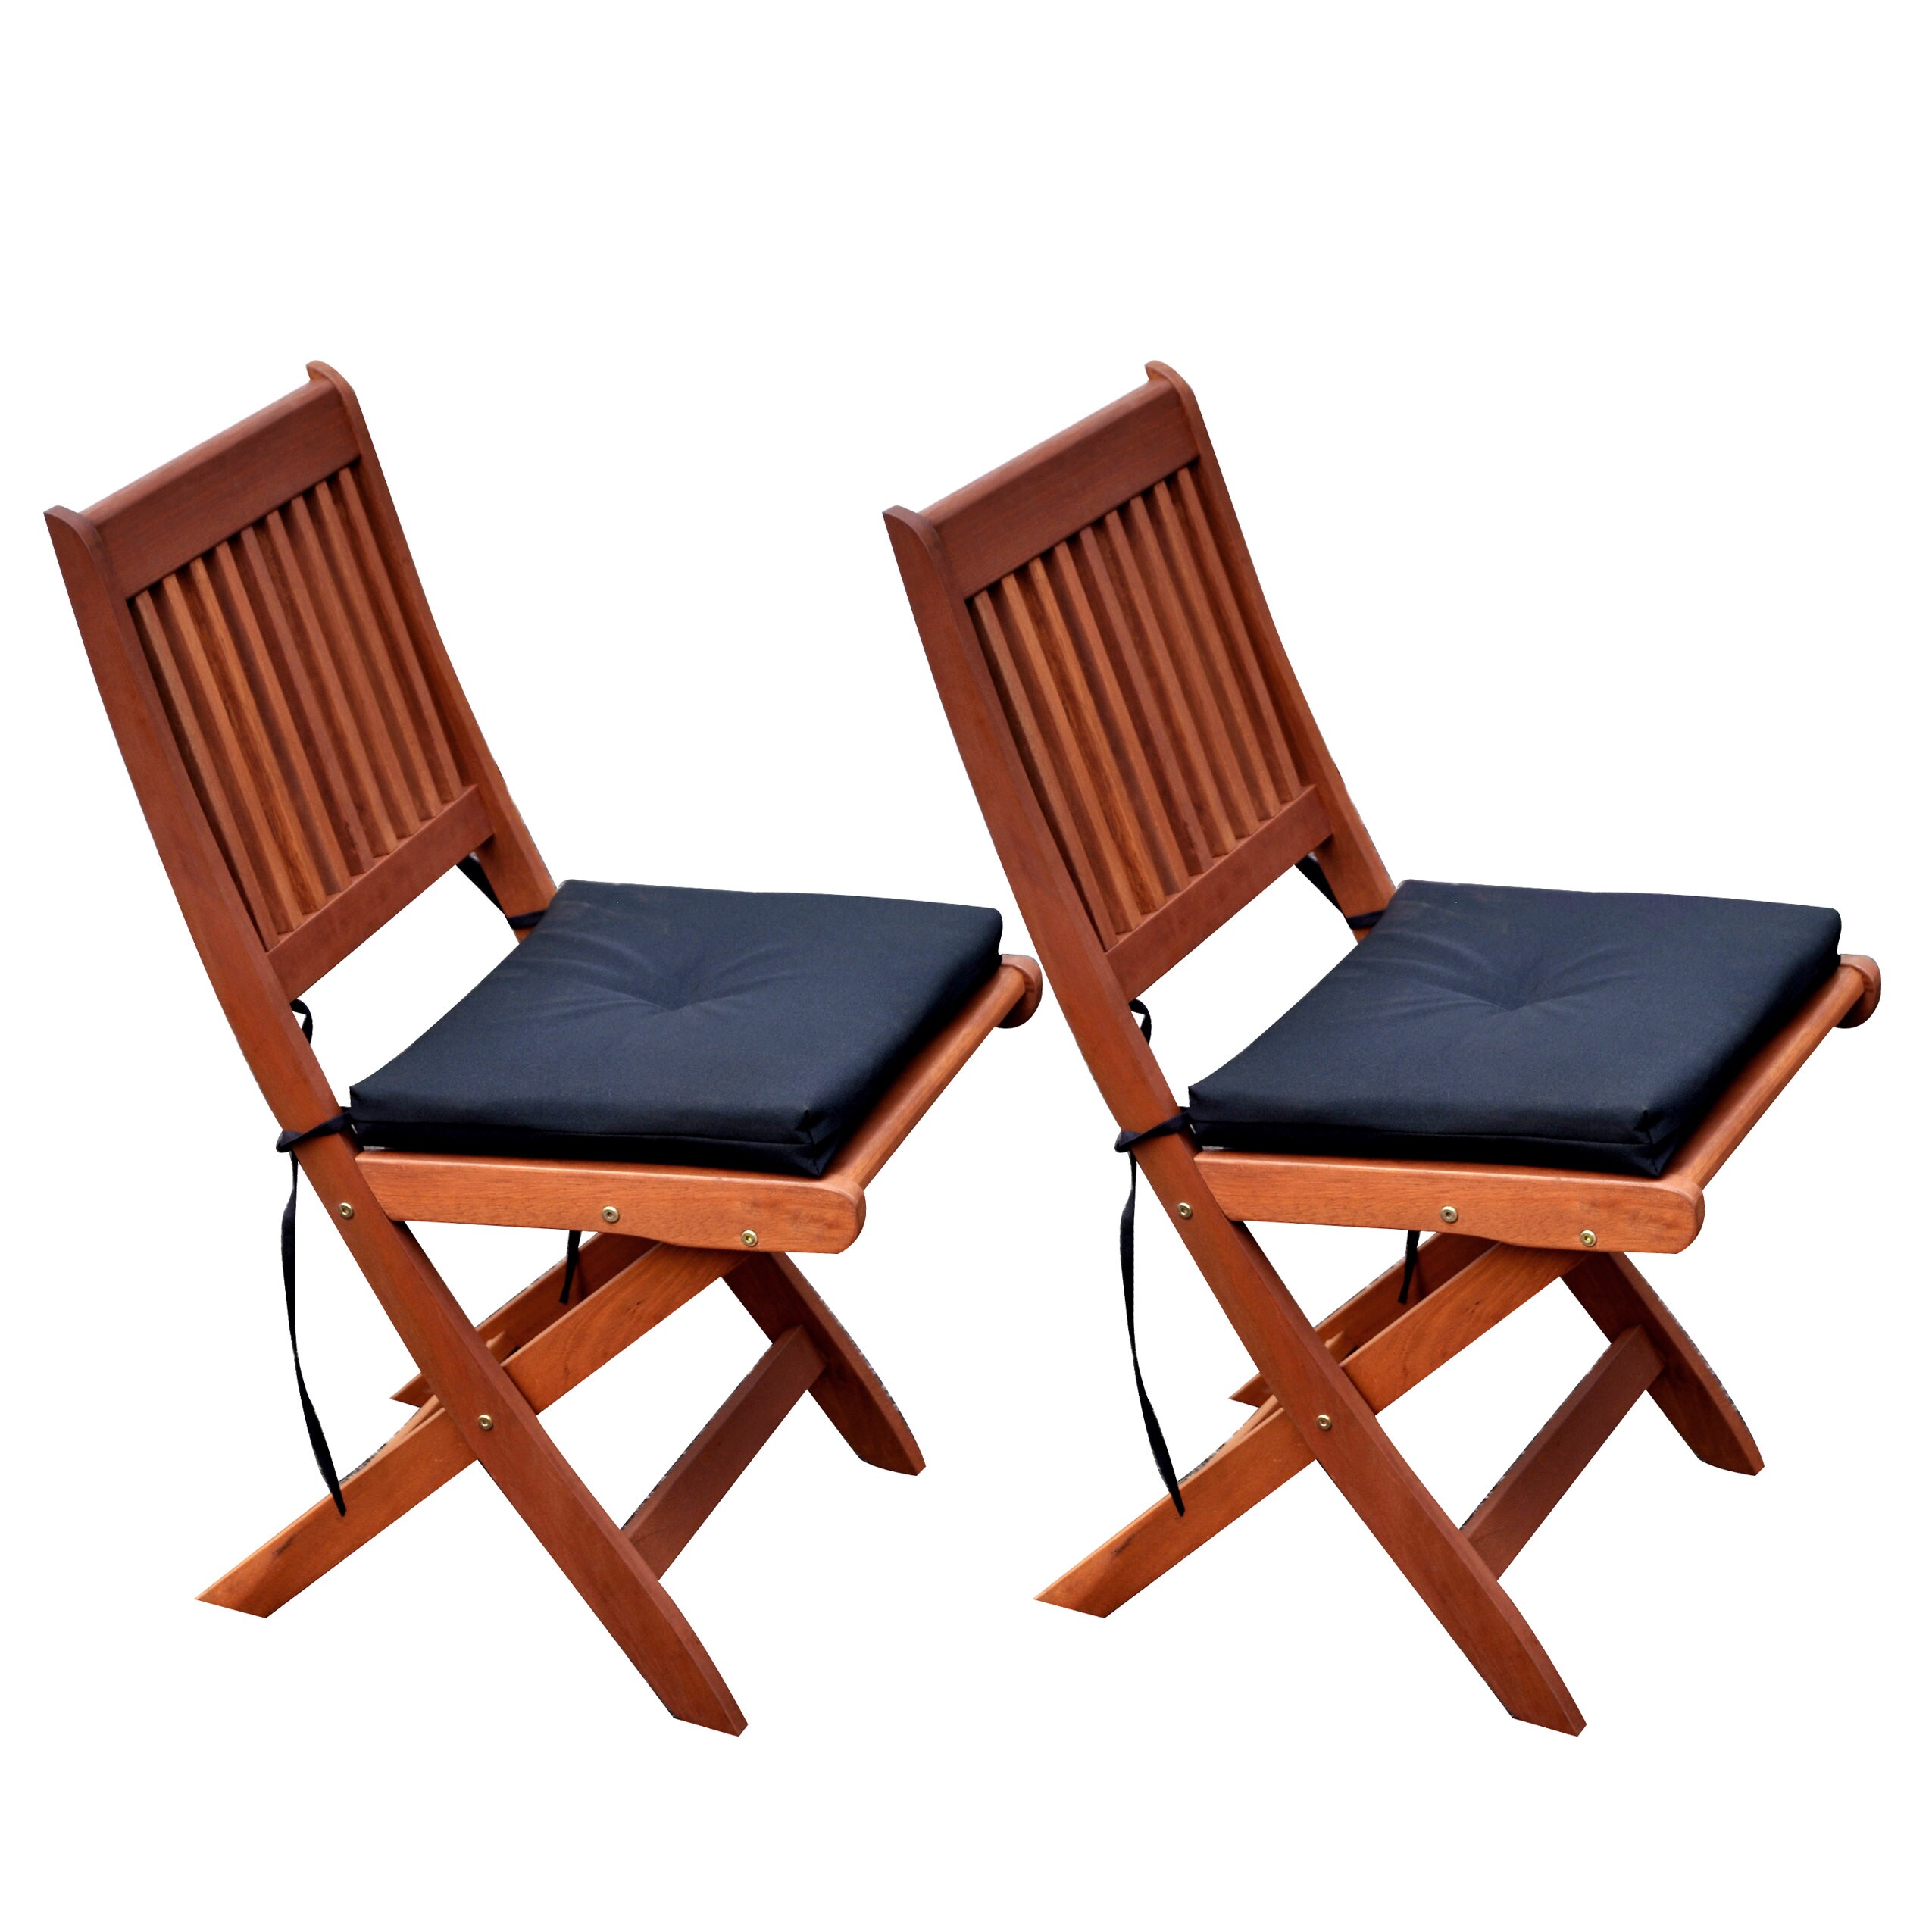 Miramar Set of 2 Cinnamon Brown Wood Frame Stationary Dining Chair(s) with Black Slat Seat Polyester | - CorLiving PEX-369-C